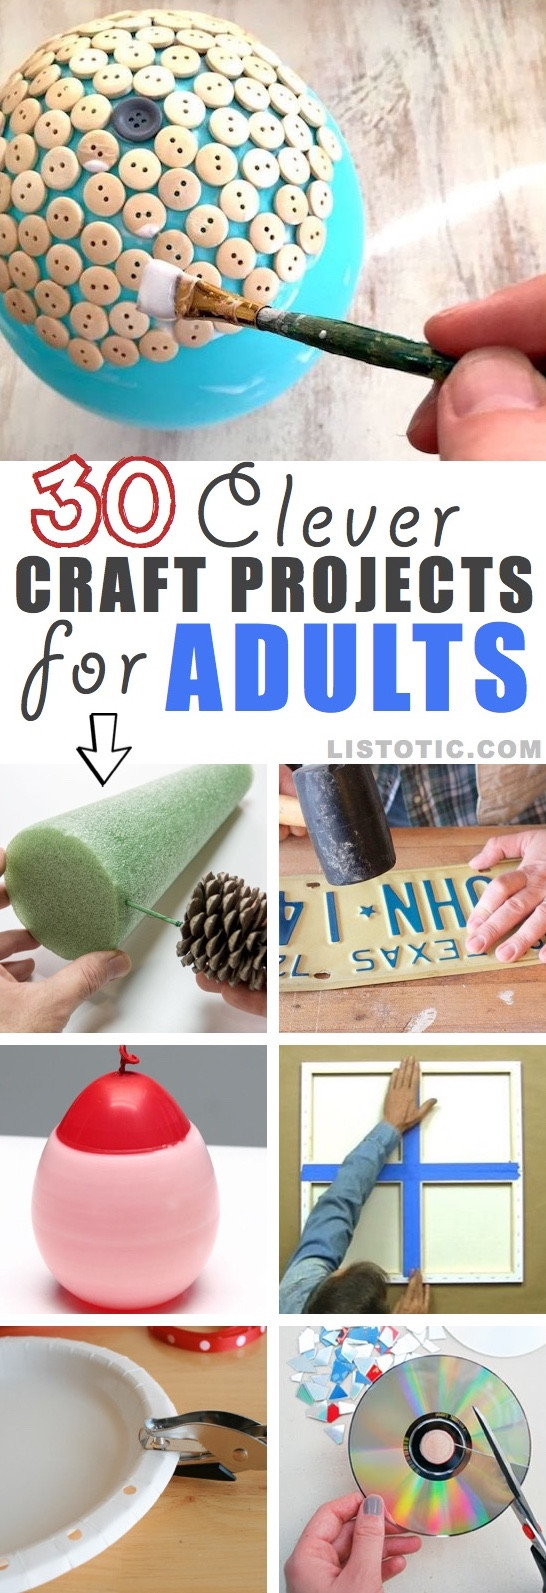 Activity Ideas For Adults
 10 Creative Craft Ideas For Adults Abundator